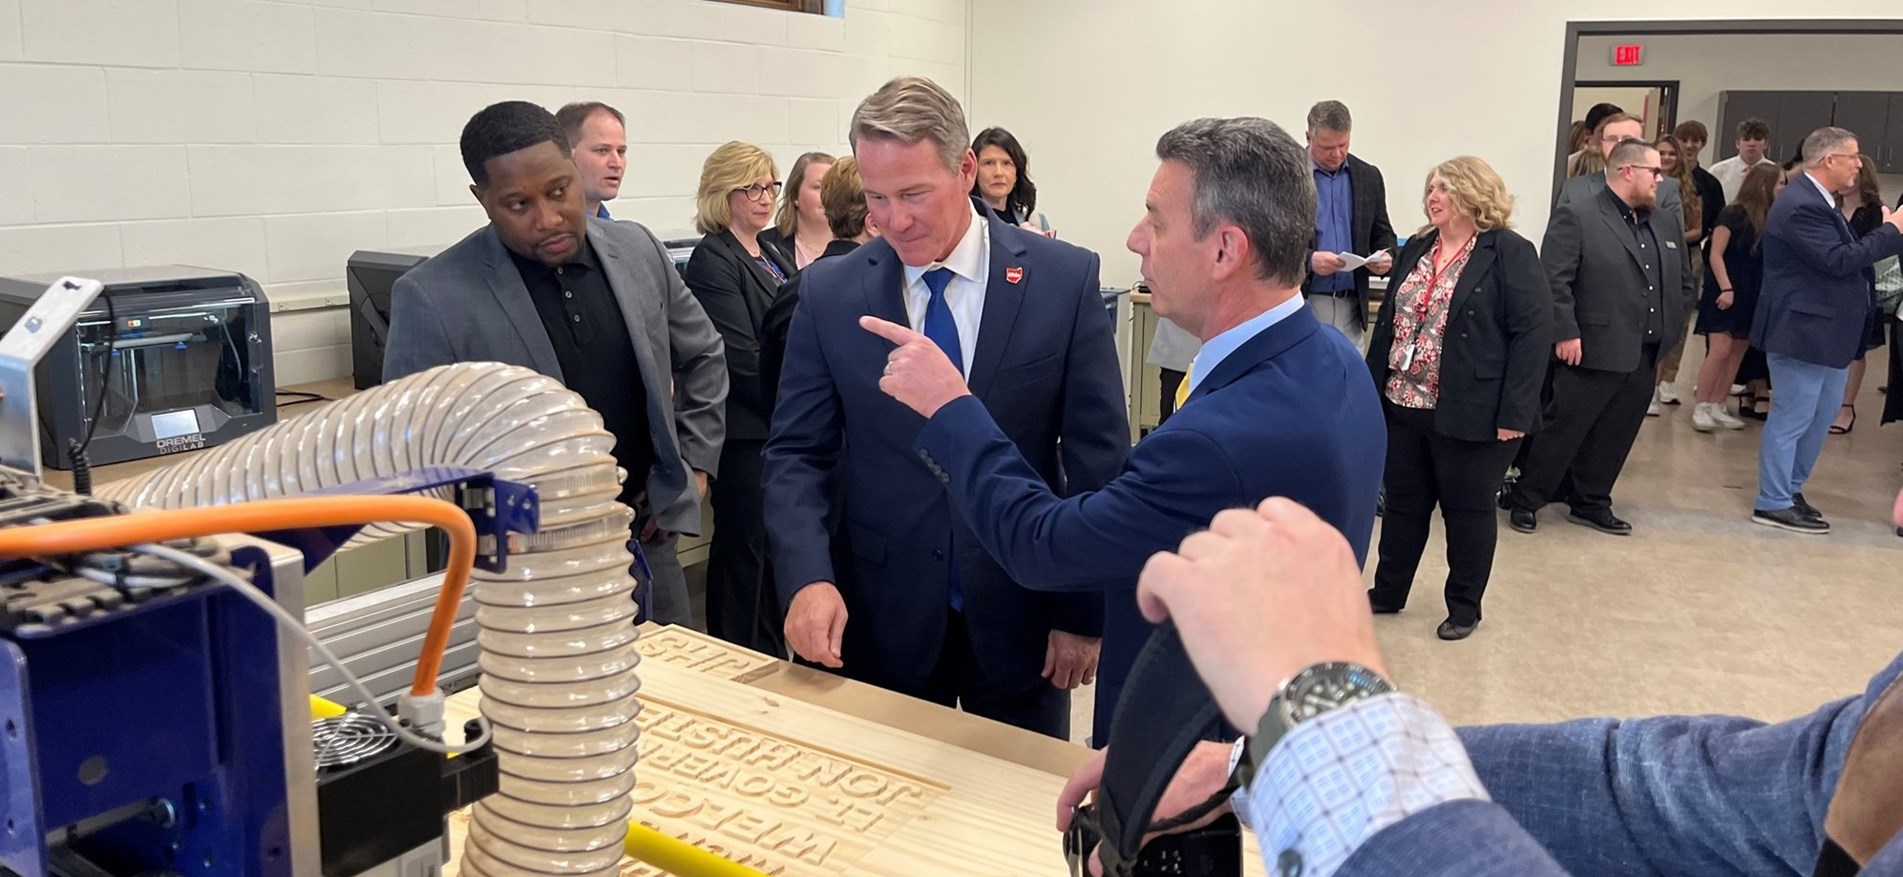 Meta representative, Lt. Governor Jon Husted and other officials examine new STEAM materials.